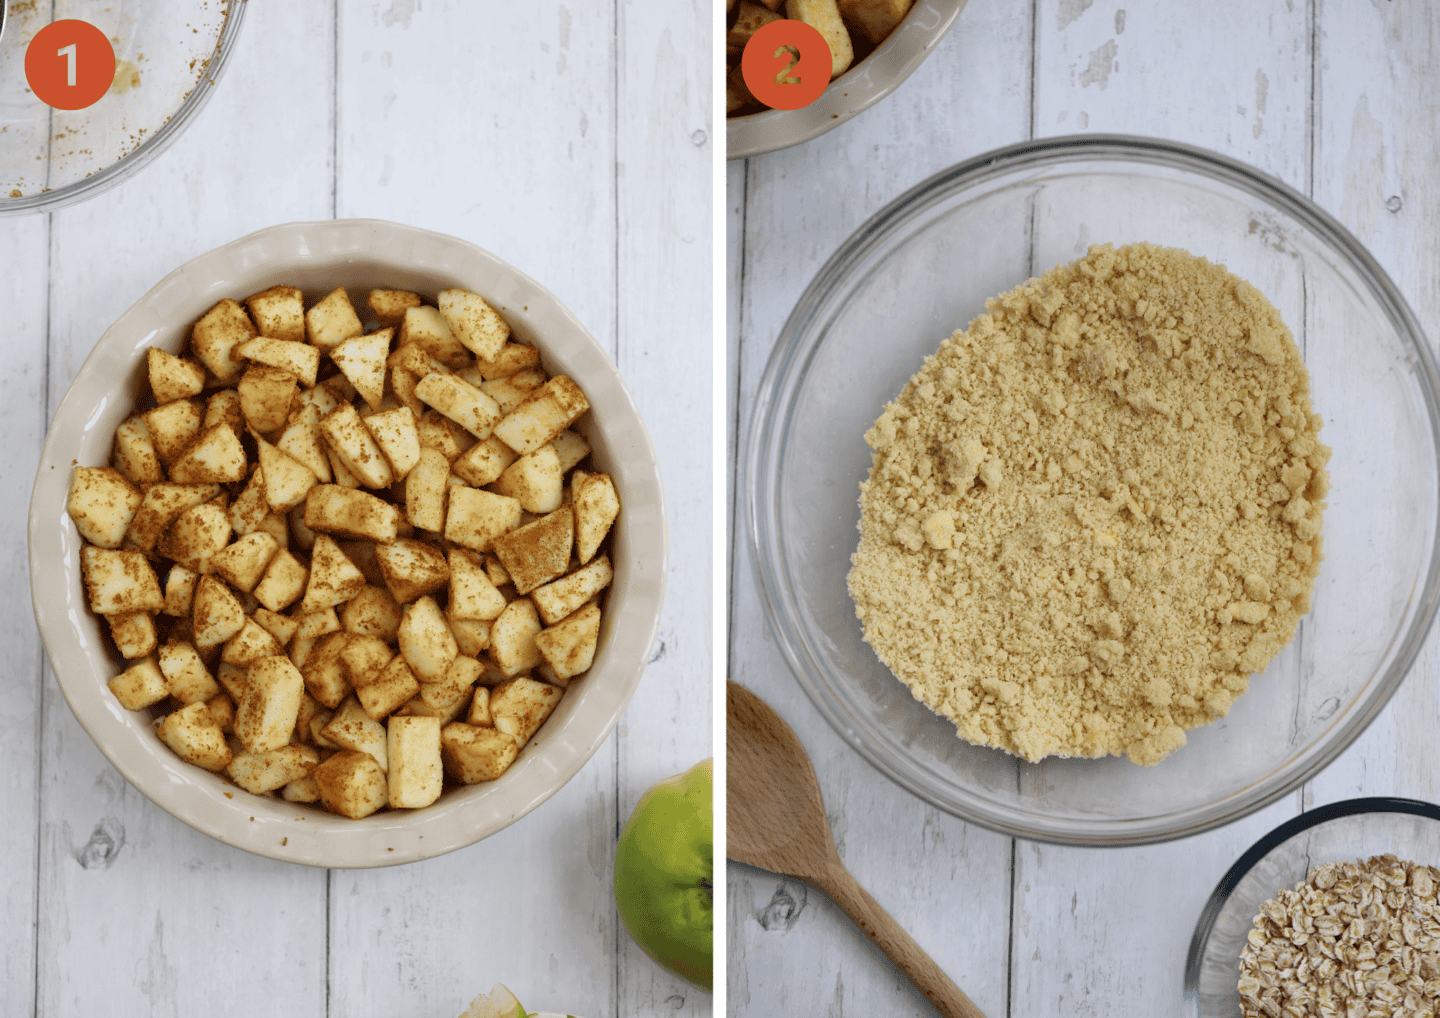 Chopped apples in a pie dish and the ingredients for an apple crumble topping.